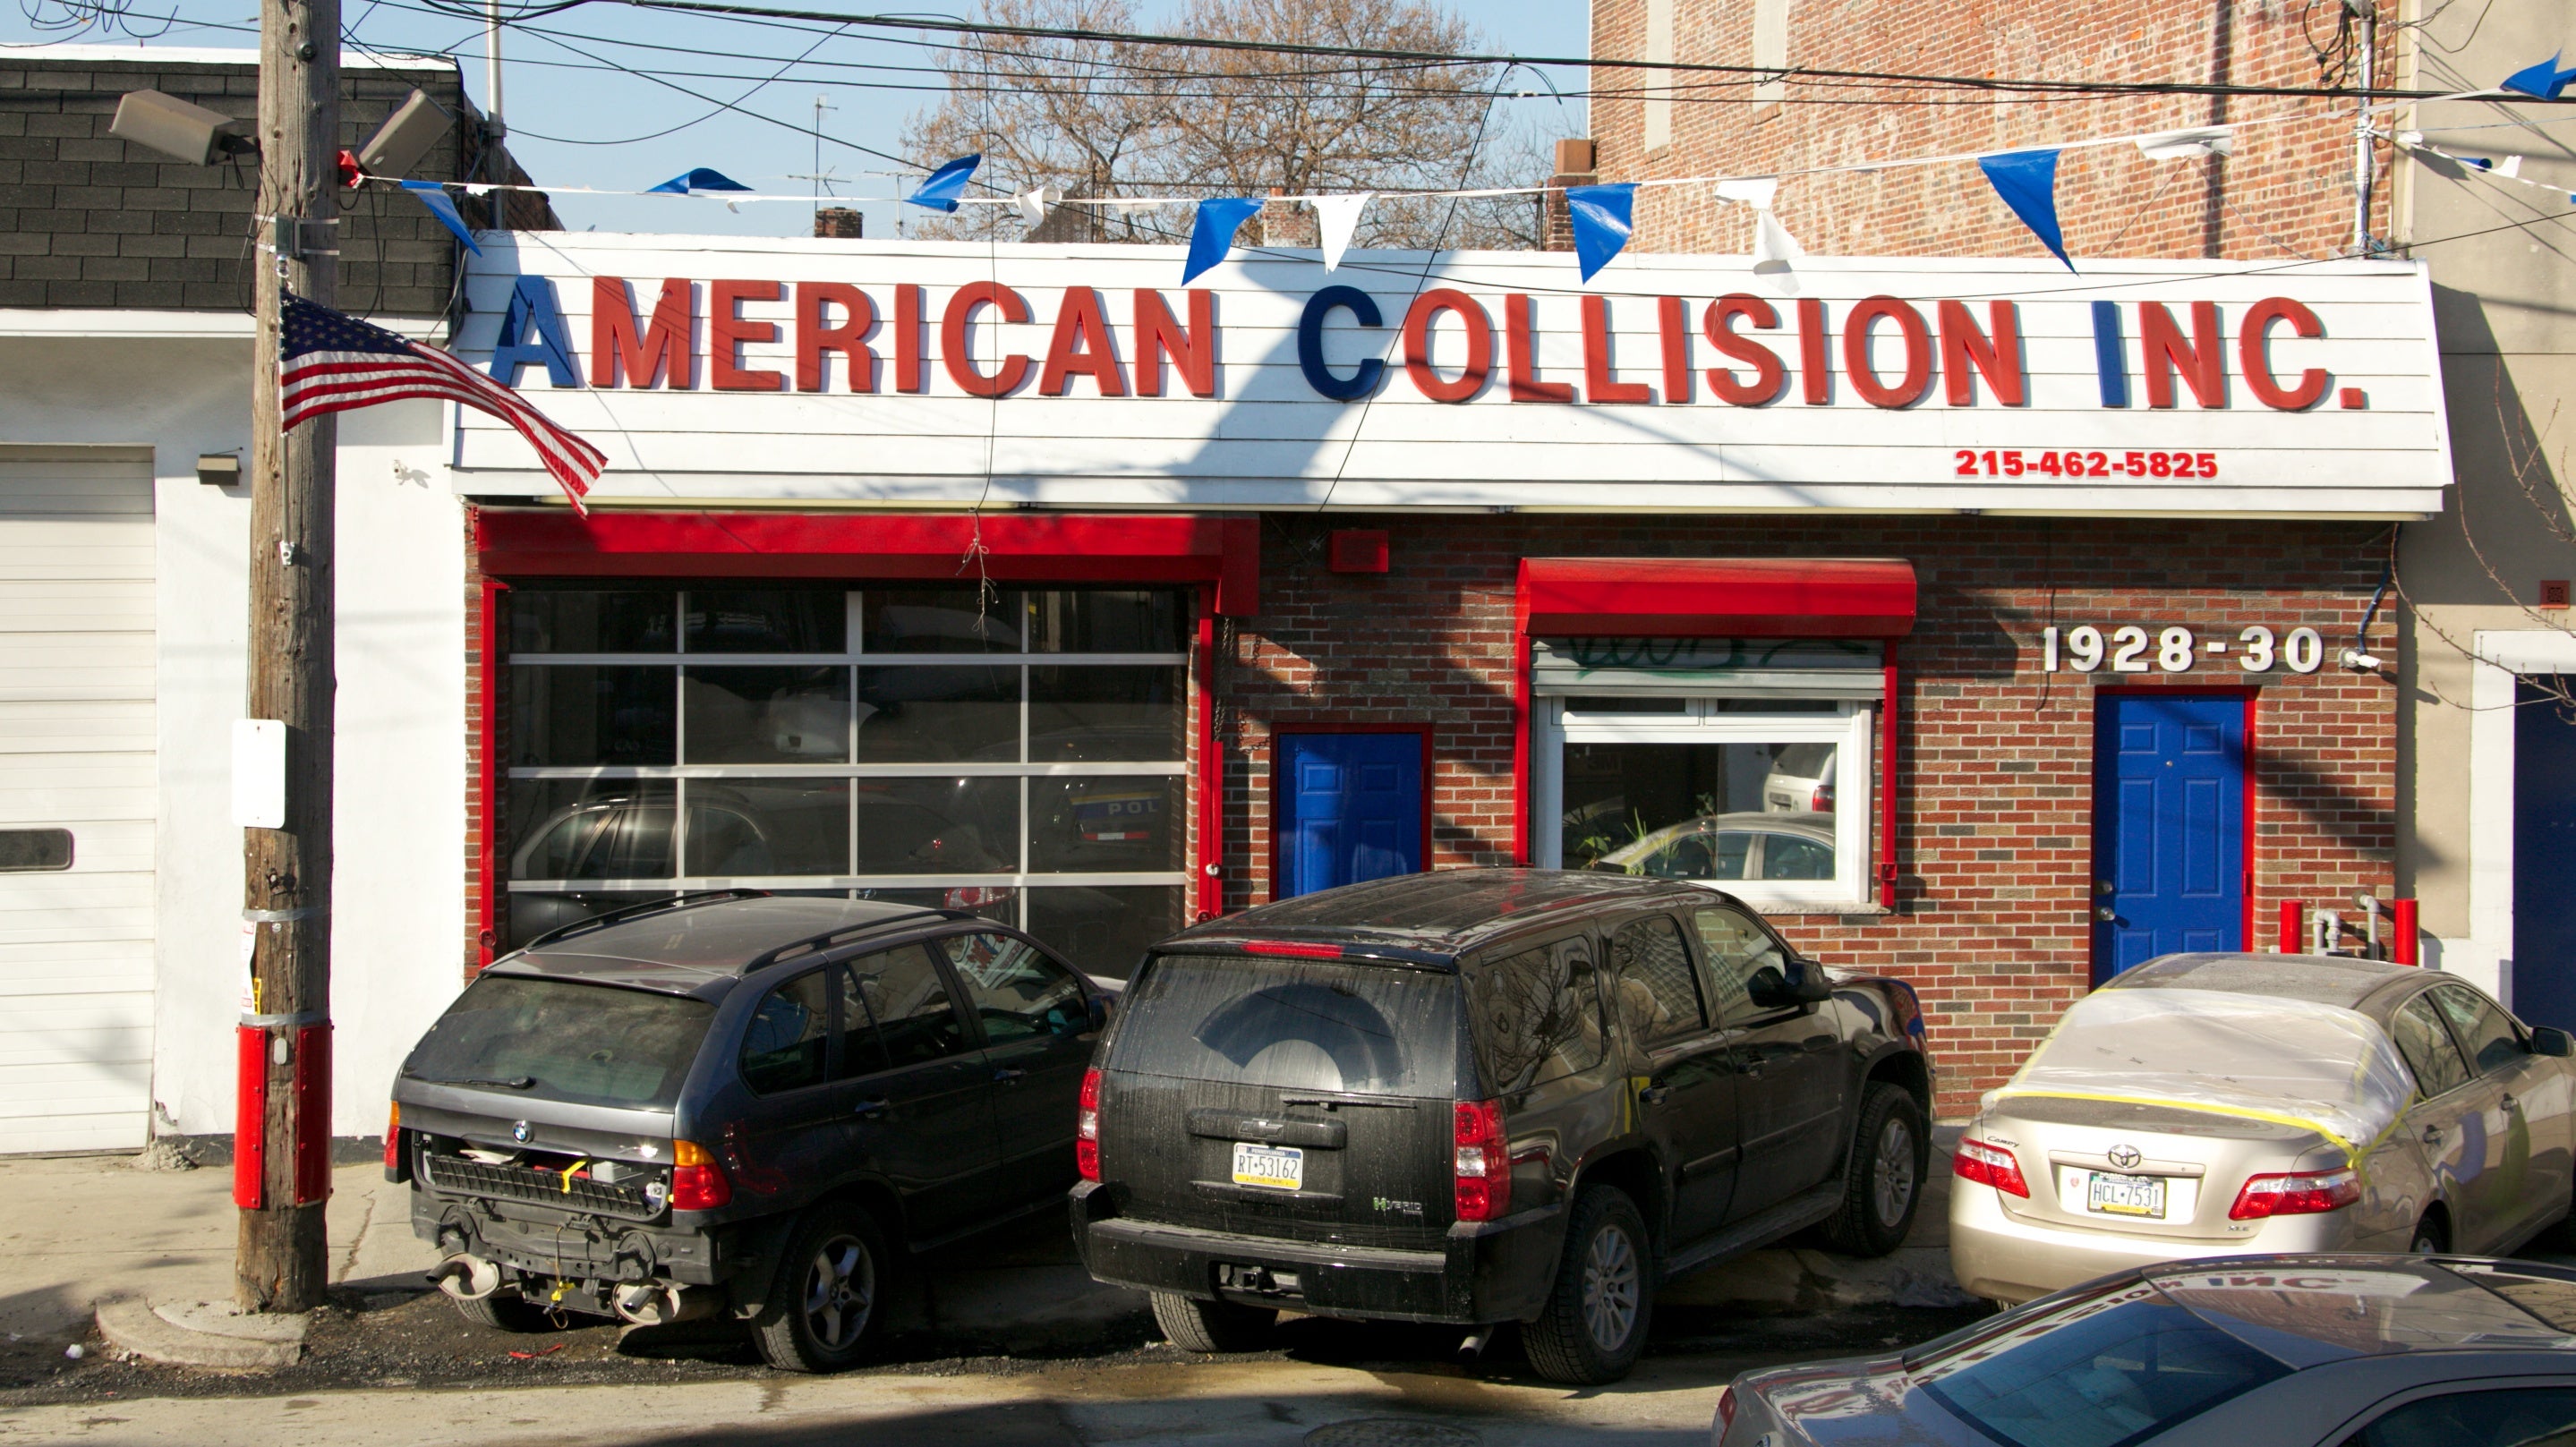  As of August 2013 the city of Philadelphia had paid American Collision more than $1.2 million to repair public vehicles. The contract began in fiscal year 2011. Philadelphia has since cut ties with the repair shop. (Nathaniel Hamilton/for NewsWorks) 